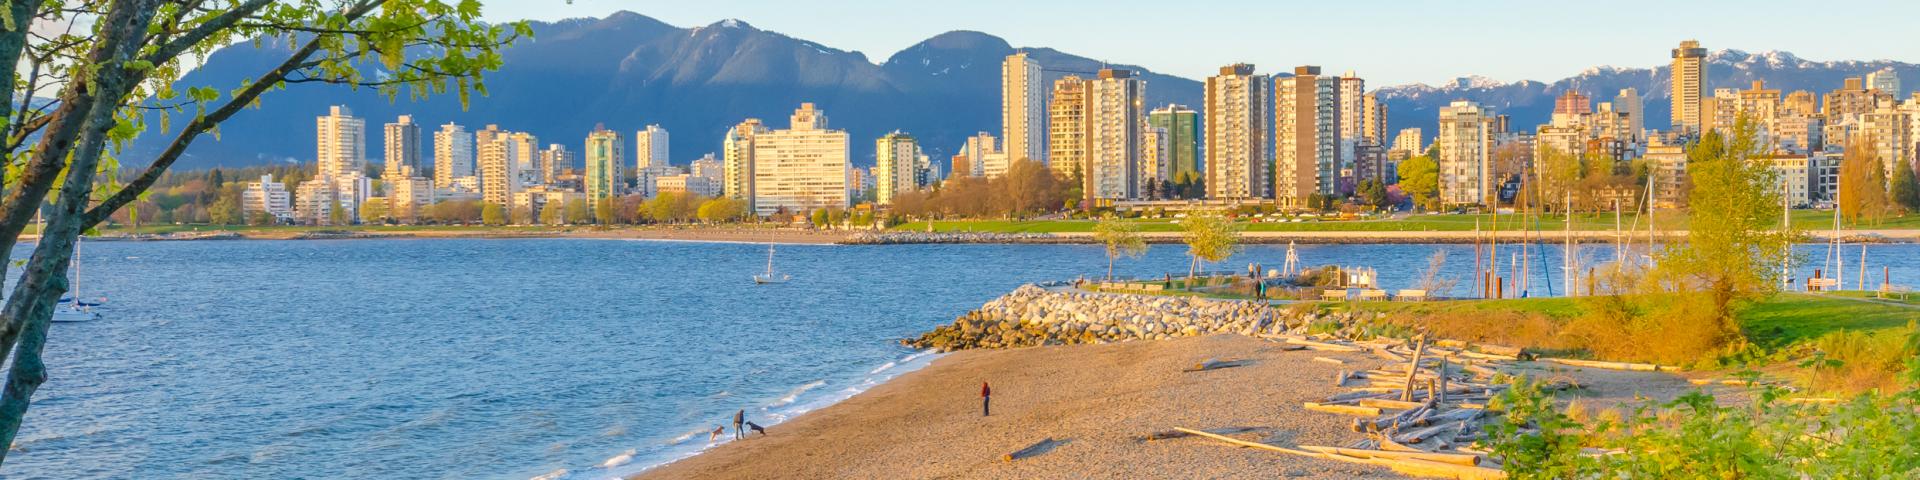 Best Beaches to Visit in Vancouver